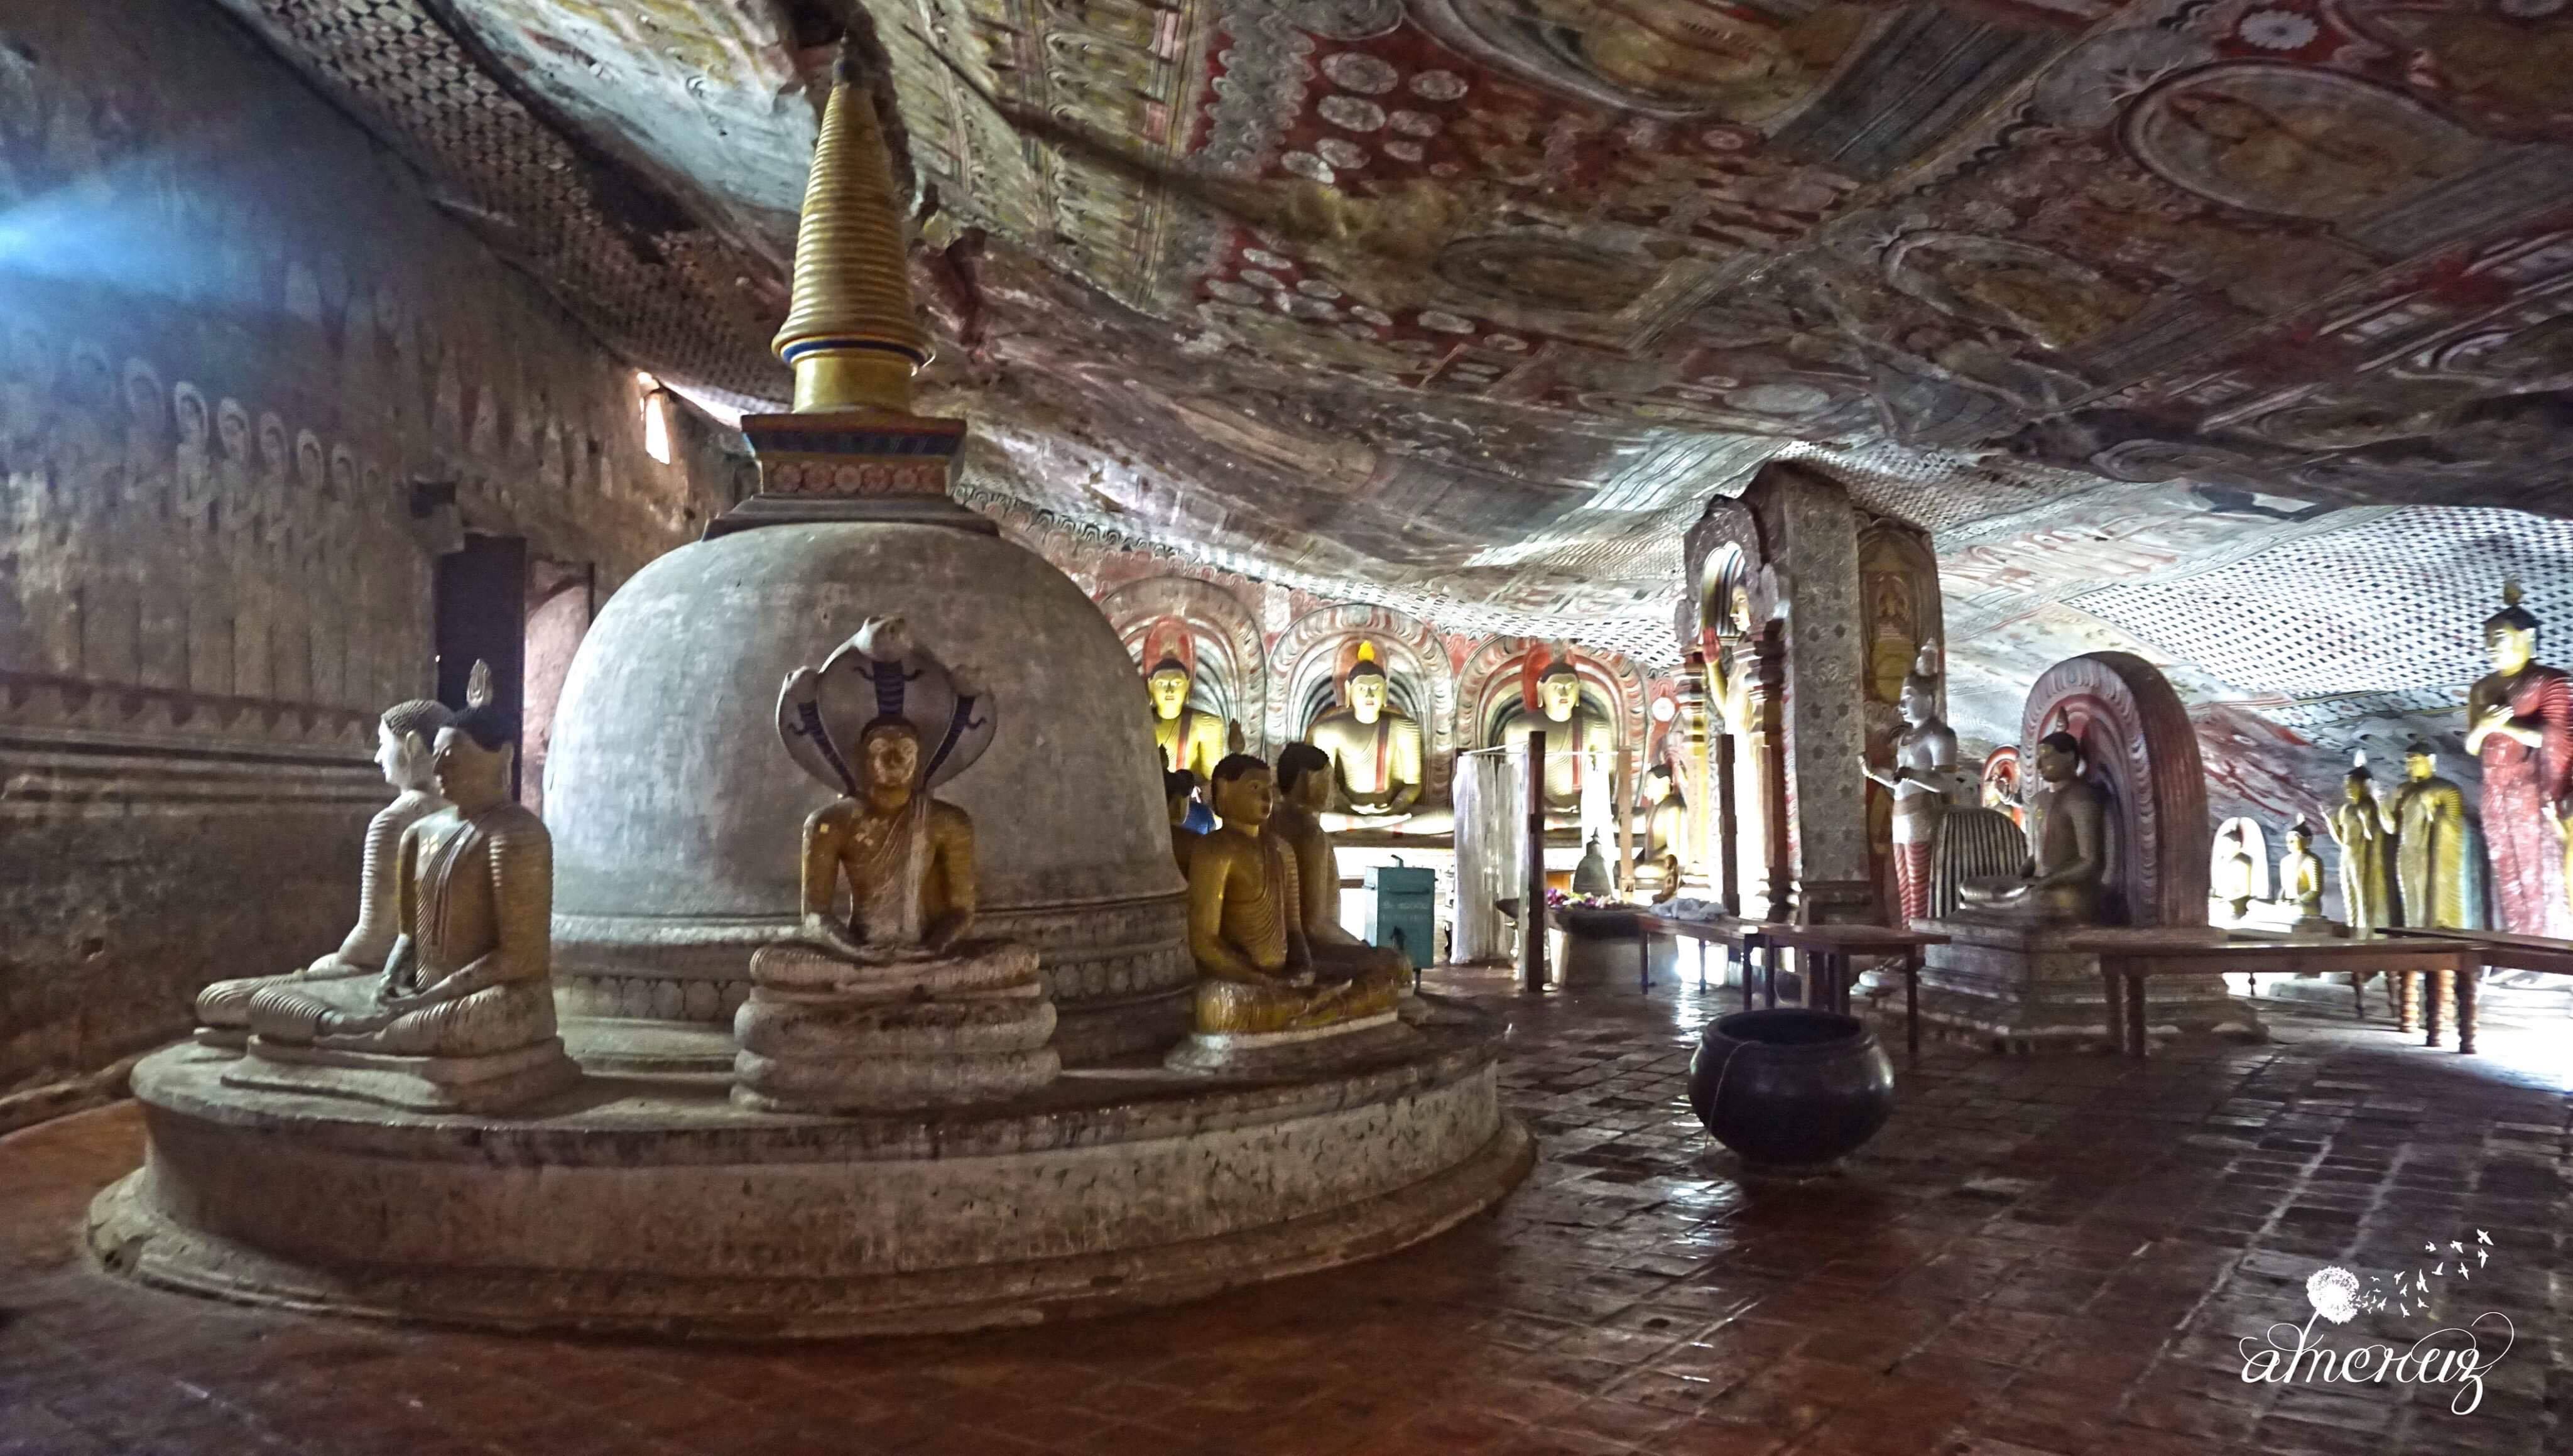 Dambulla Cave Temple.  The largest and well-preserved temple in Sri Lanka. Inside the cave, there are numerous Buddha statues, painted wall and ceiling of ancient art preserved over the centuries. This place is so peaceful and quiet.